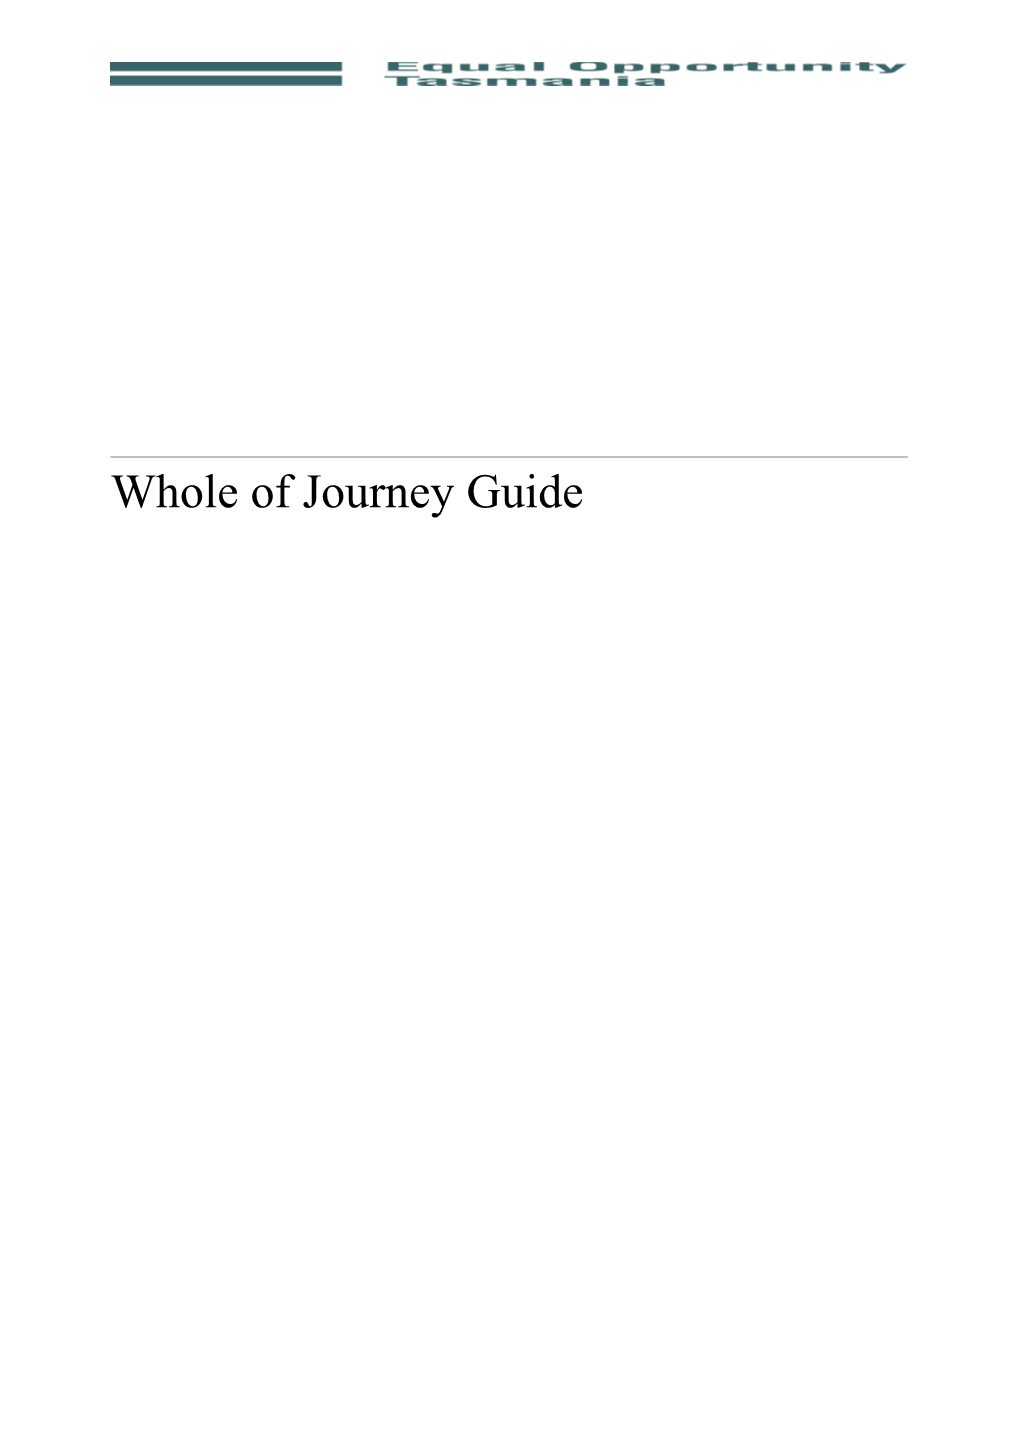 Whole of Journey Guide